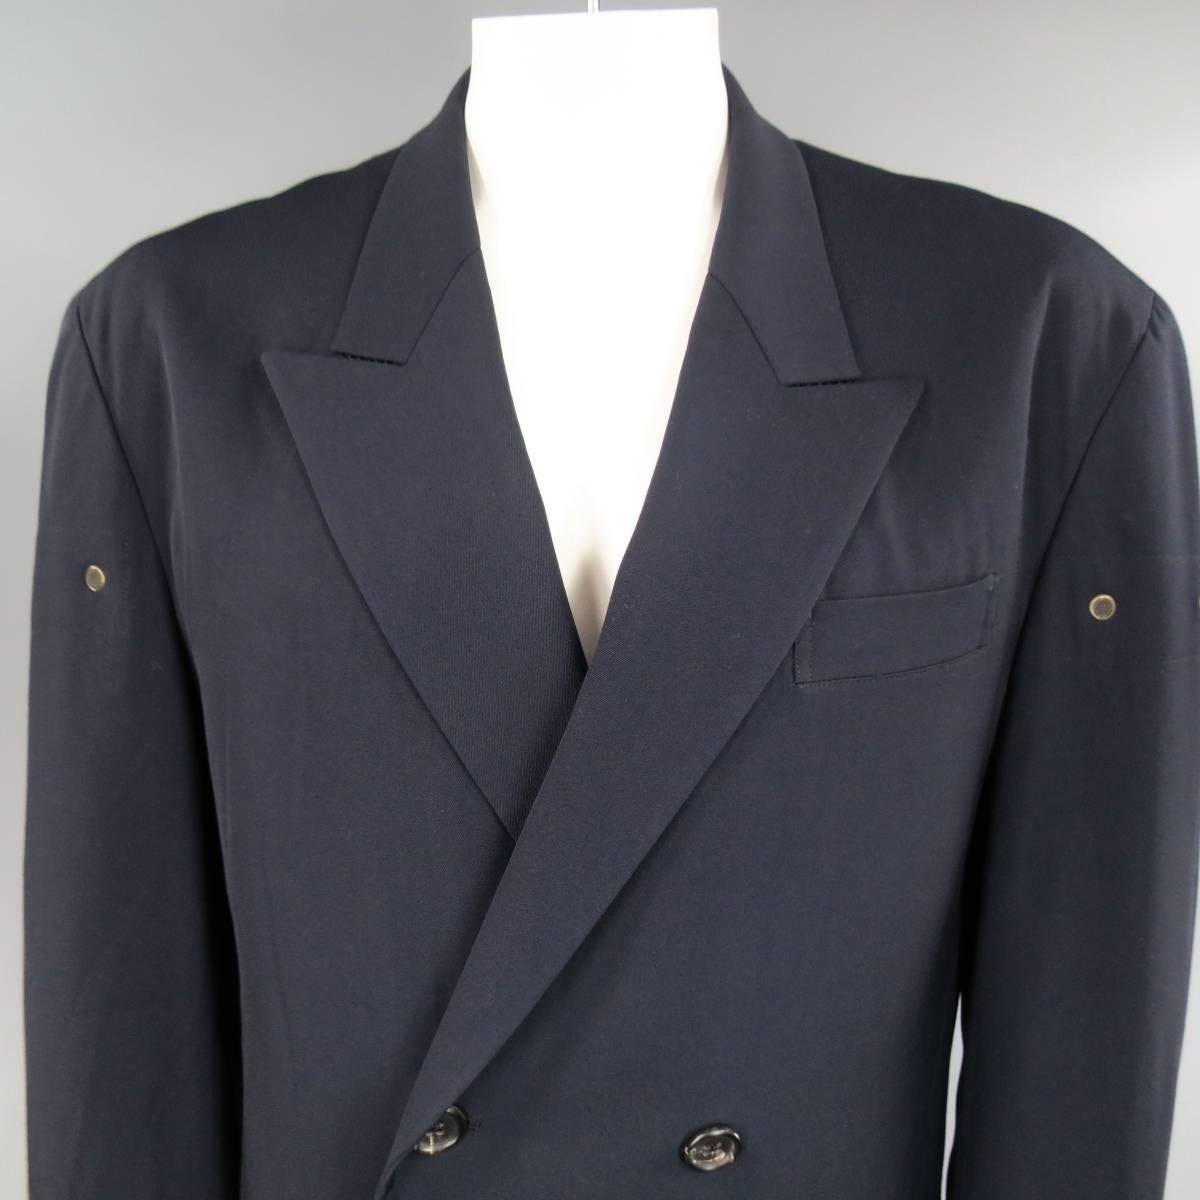 Oversized vintage Men's Yohji Yamamoto Homme sport coat in navy blue wool twill featuring a wide, peak lapel, double breasted closure, double flap pockets, ventless back, and dark gold tone metal mesh grommet vent details through mid section. Made